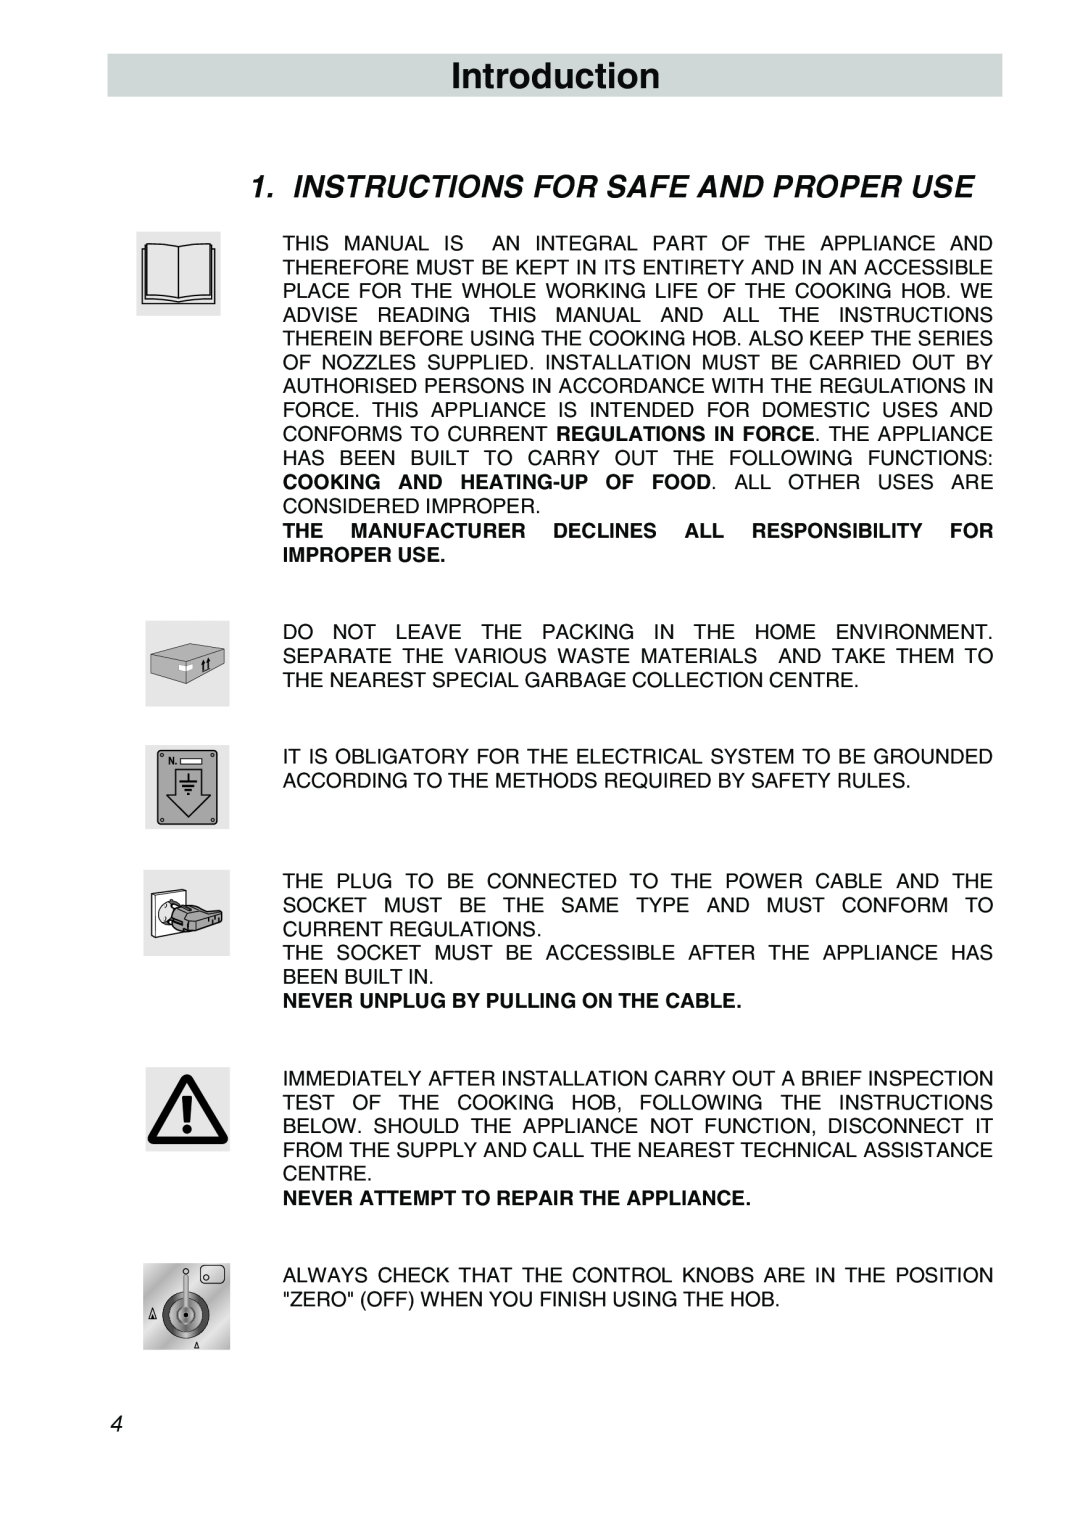 Smeg CIR60X3 manual Introduction, Instructions For Safe And Proper Use, Never Unplug By Pulling On The Cable 